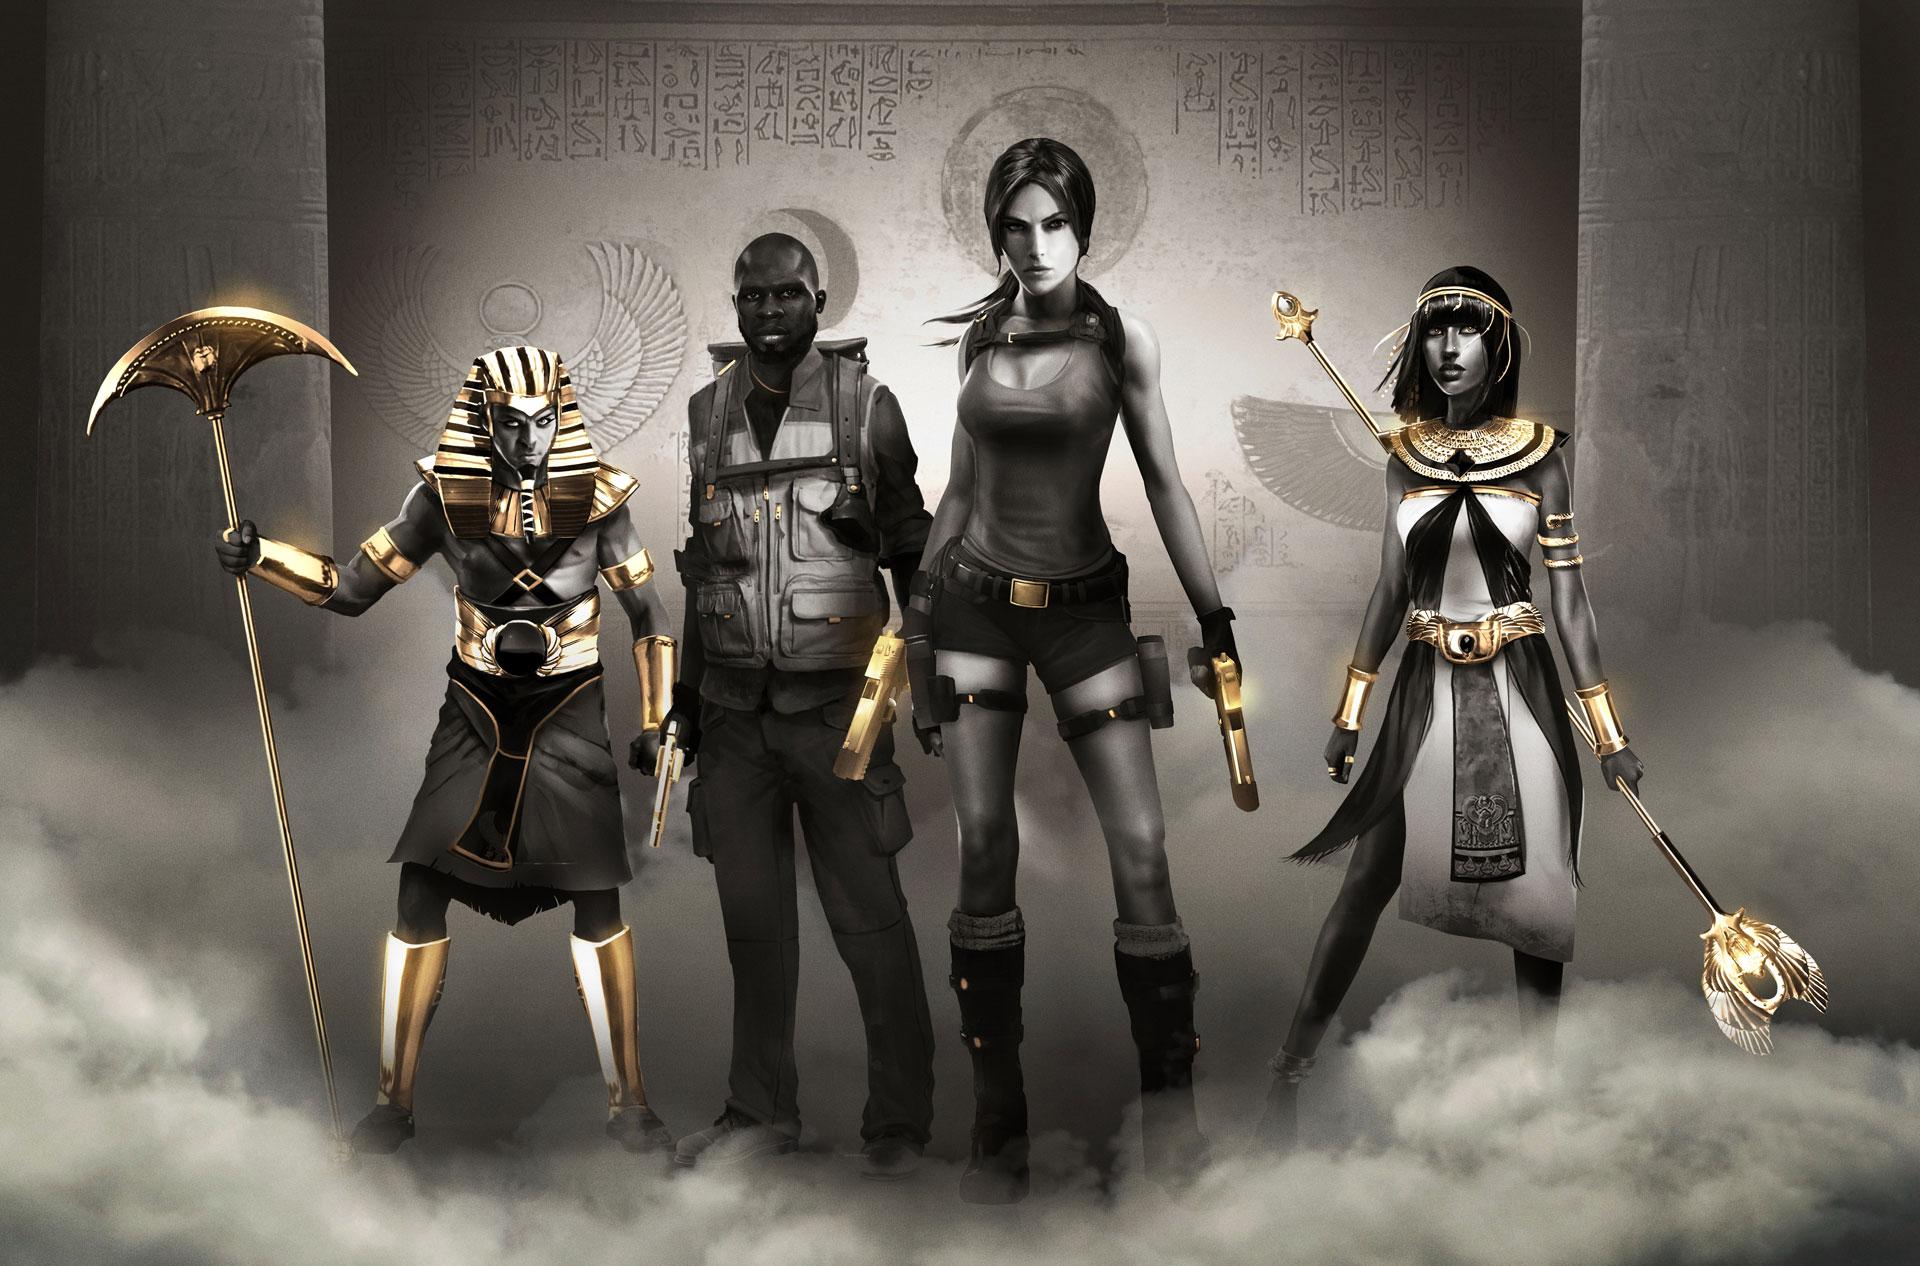 Lara Croft And The Temple Of Osiris Backgrounds, Compatible - PC, Mobile, Gadgets| 1920x1266 px